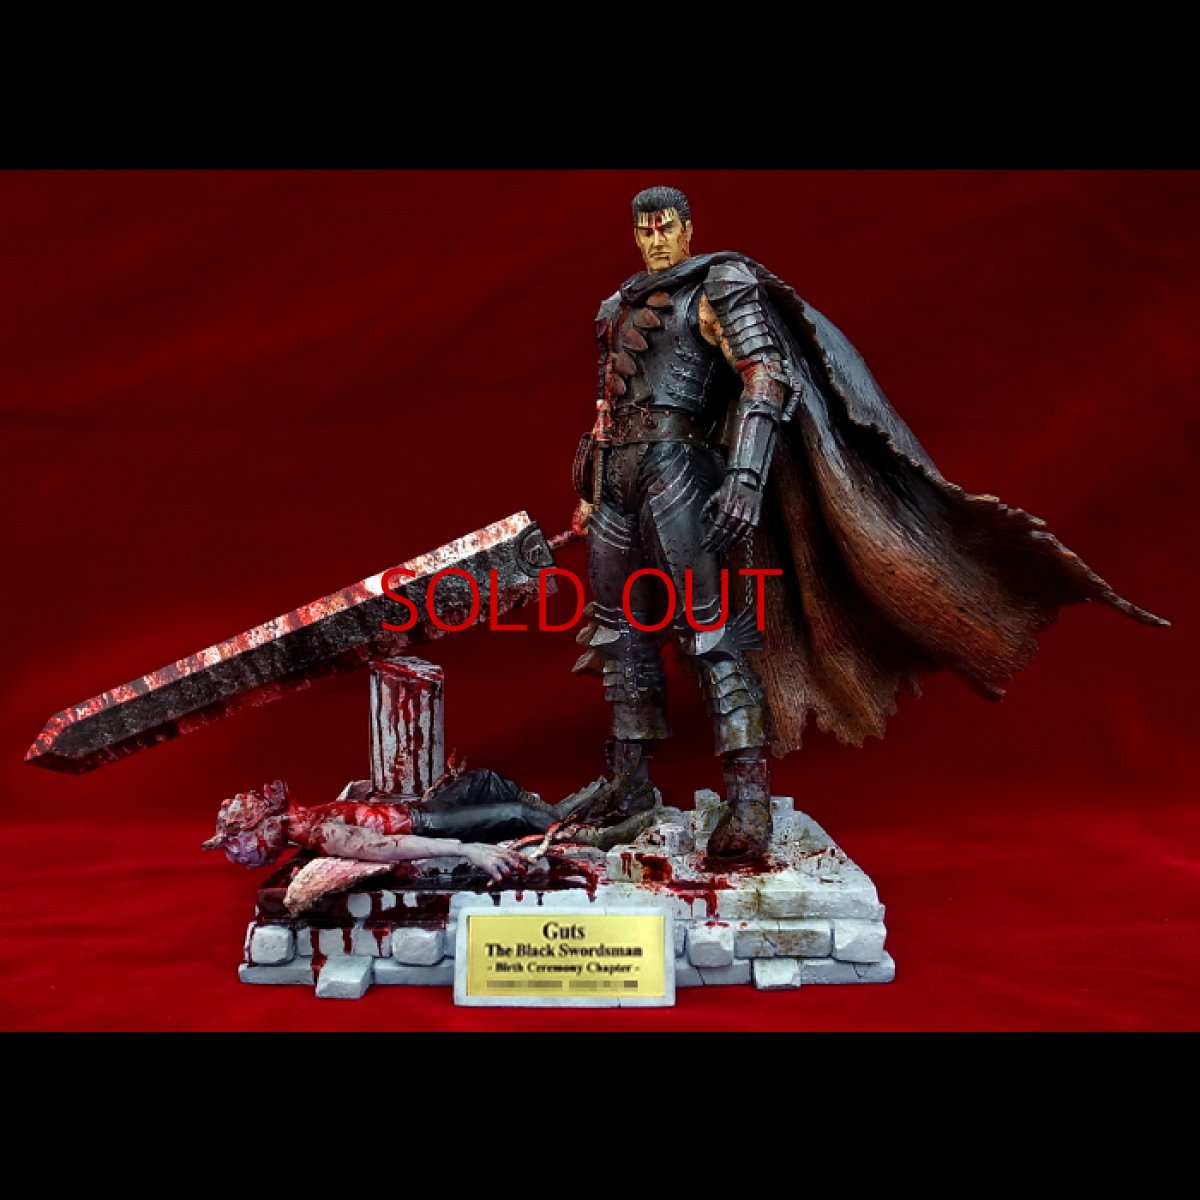 Photo1: No.323 Guts the Black Swordsman - Birth Ceremony Chapter 1/10 Scale *Bloody Repaint Limited Version 4*Sold Out (1)